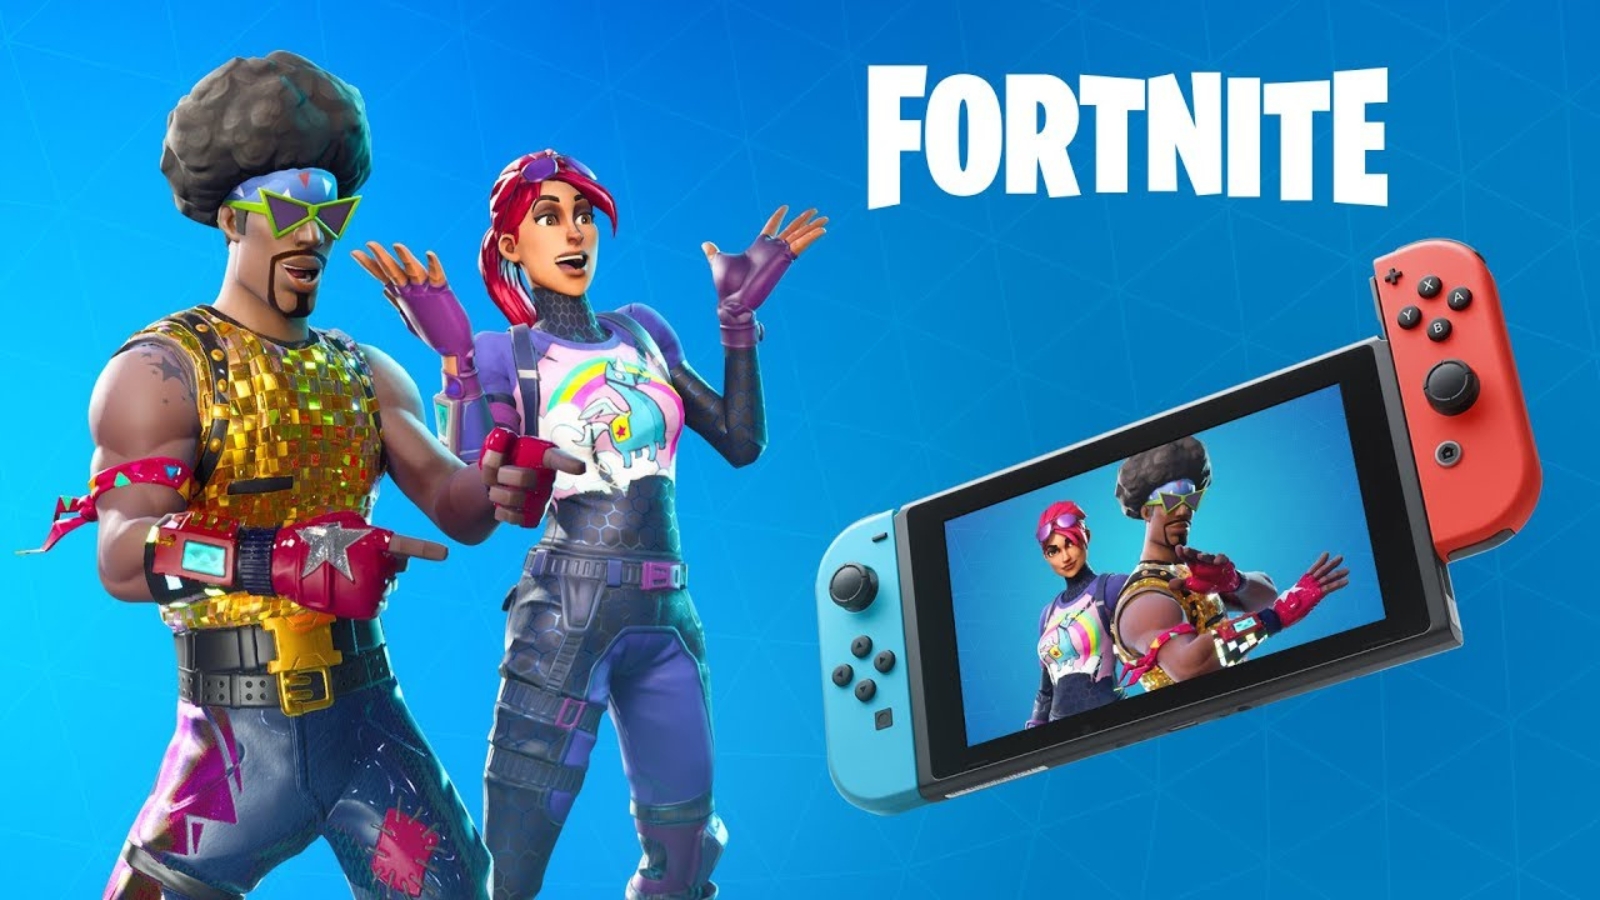 Why is Fortnite on Nintendo Switch an unpleasant experience?: Fans